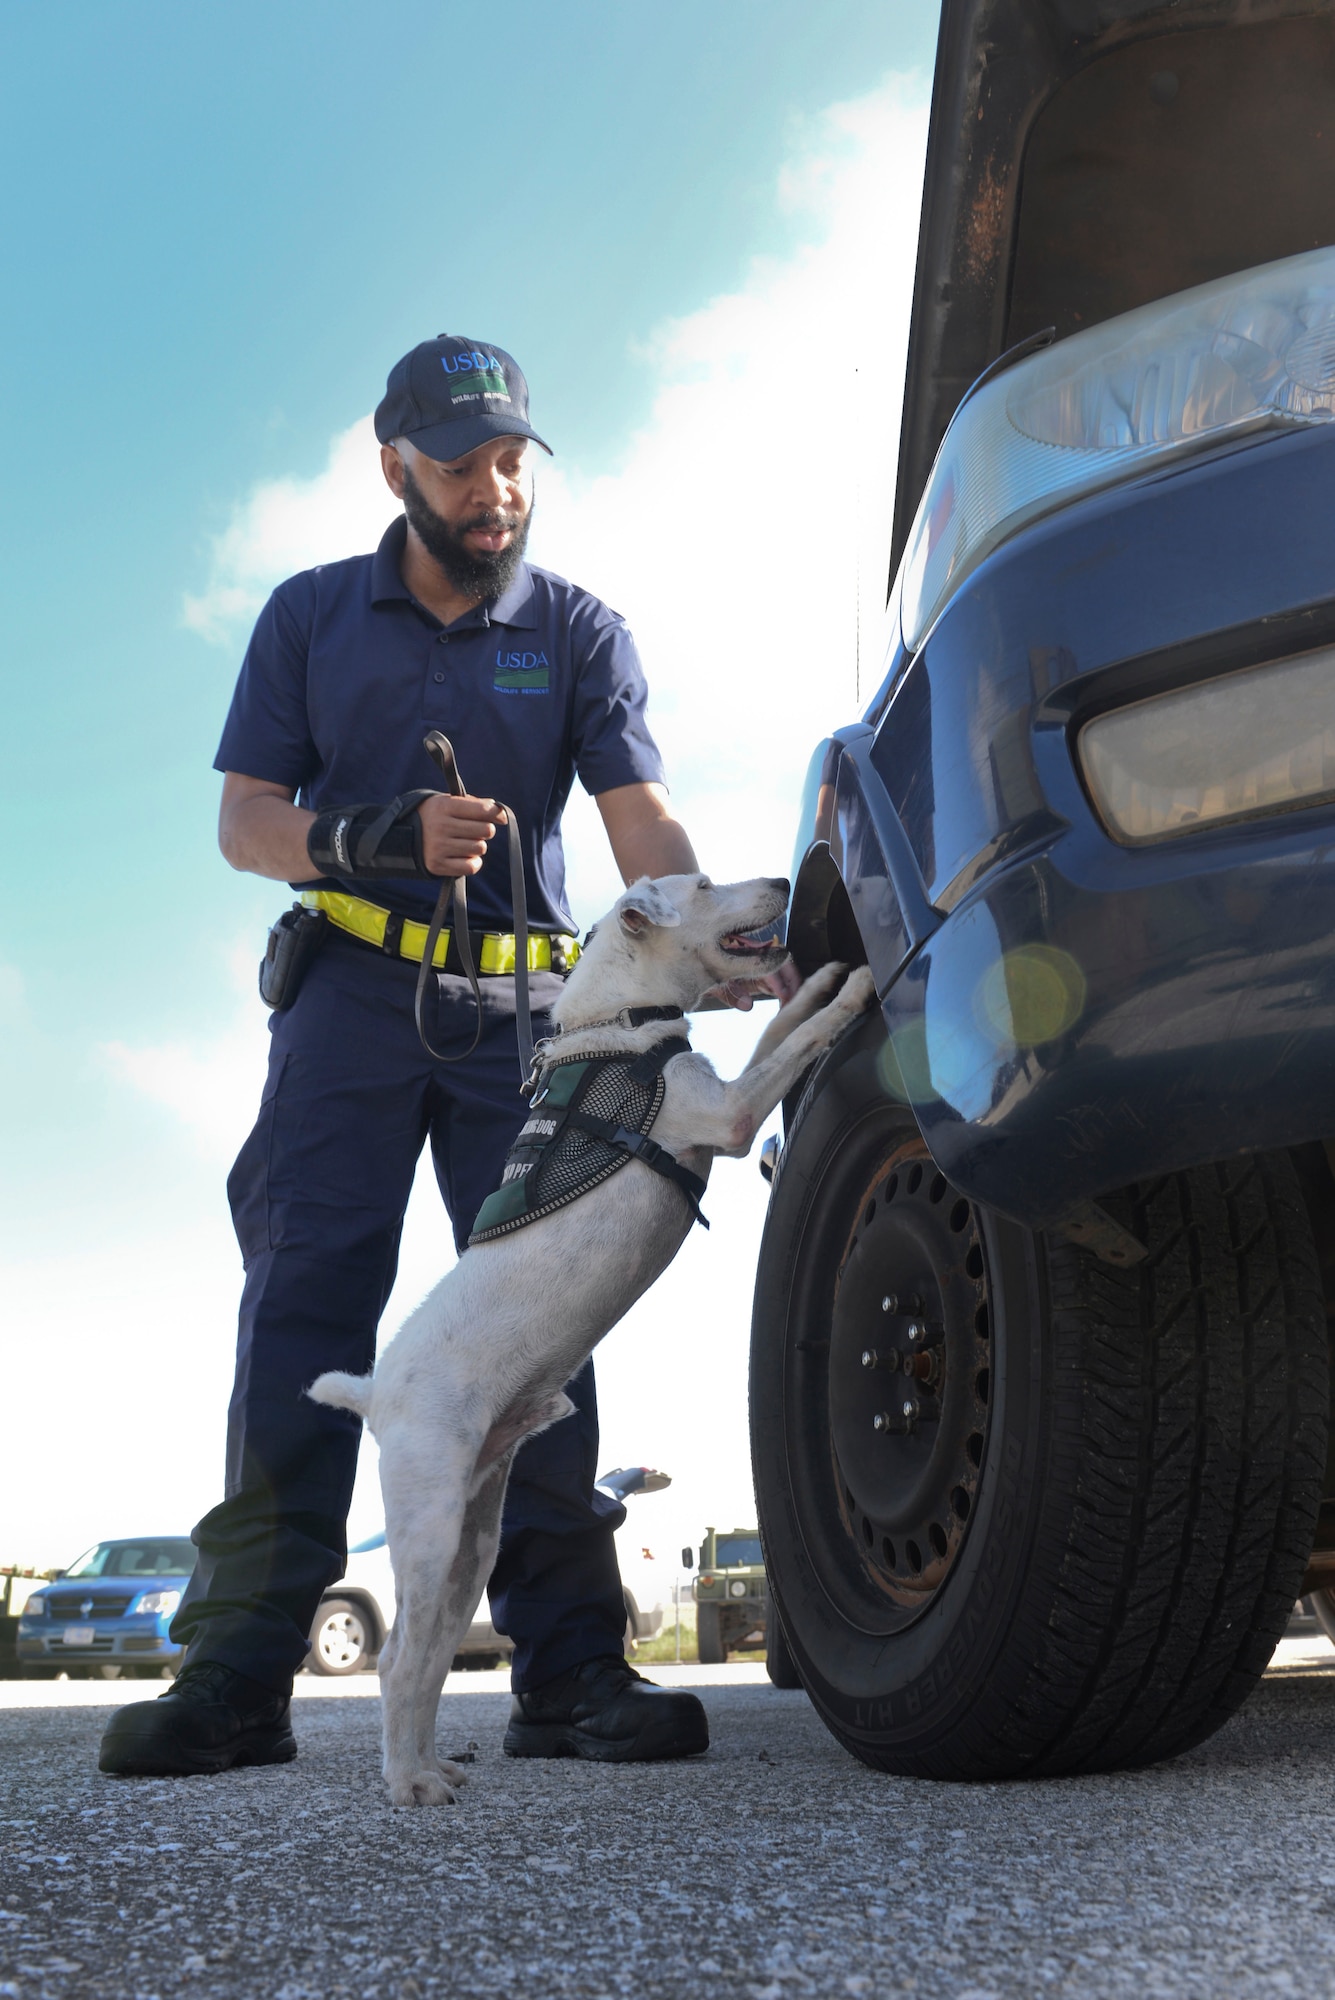 Tony Thompson, U.S. Department of Agriculture brown tree snake detector dog handler, and Striker, a USDA brown tree snake detector dog,  inspect a vehicle during a training session April 30, 2015, at Andersen Air Force Base, Guam. All USDA snake dogs are acquired from various rescue shelters in the Atlanta, Ga., area and are selected based on temperament, willingness to work and prey drive.  (U.S. Air Force photo by Senior Airman Katrina M. Brisbin/Released)